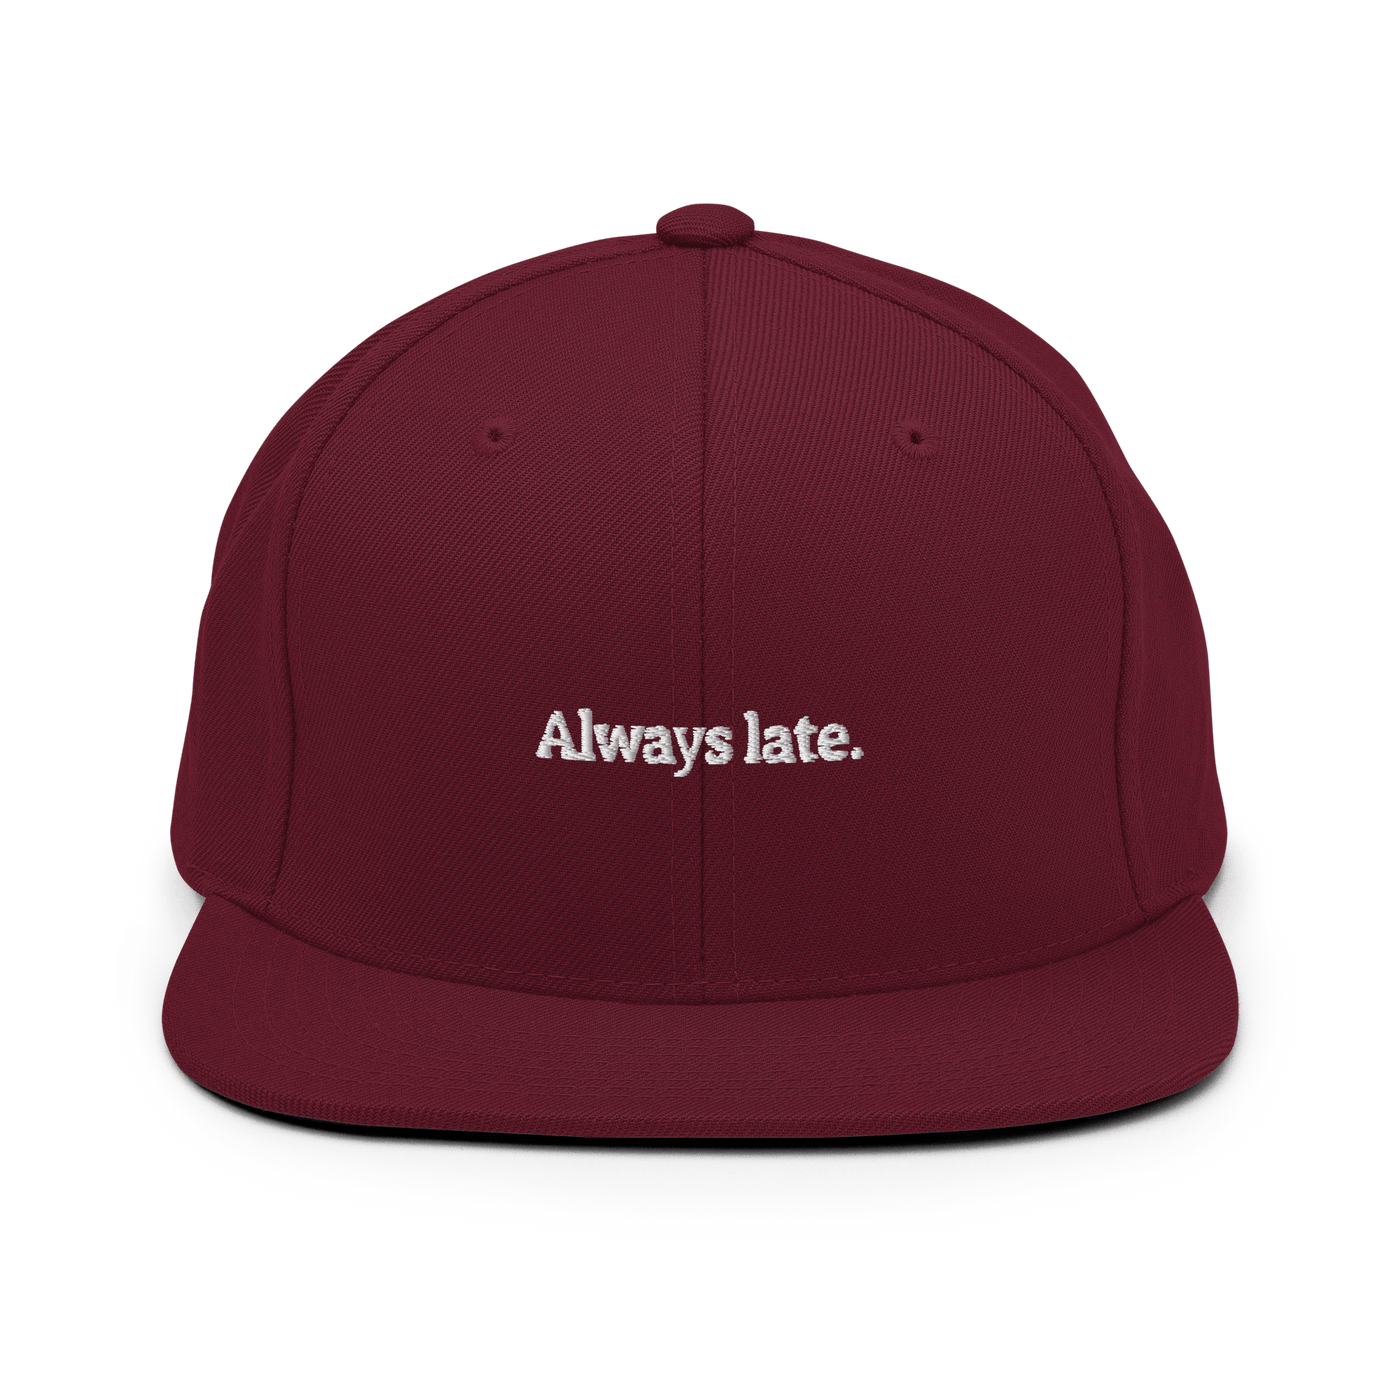 Always Late. Snapback Hat - Maroon - - Just Another Cap Store